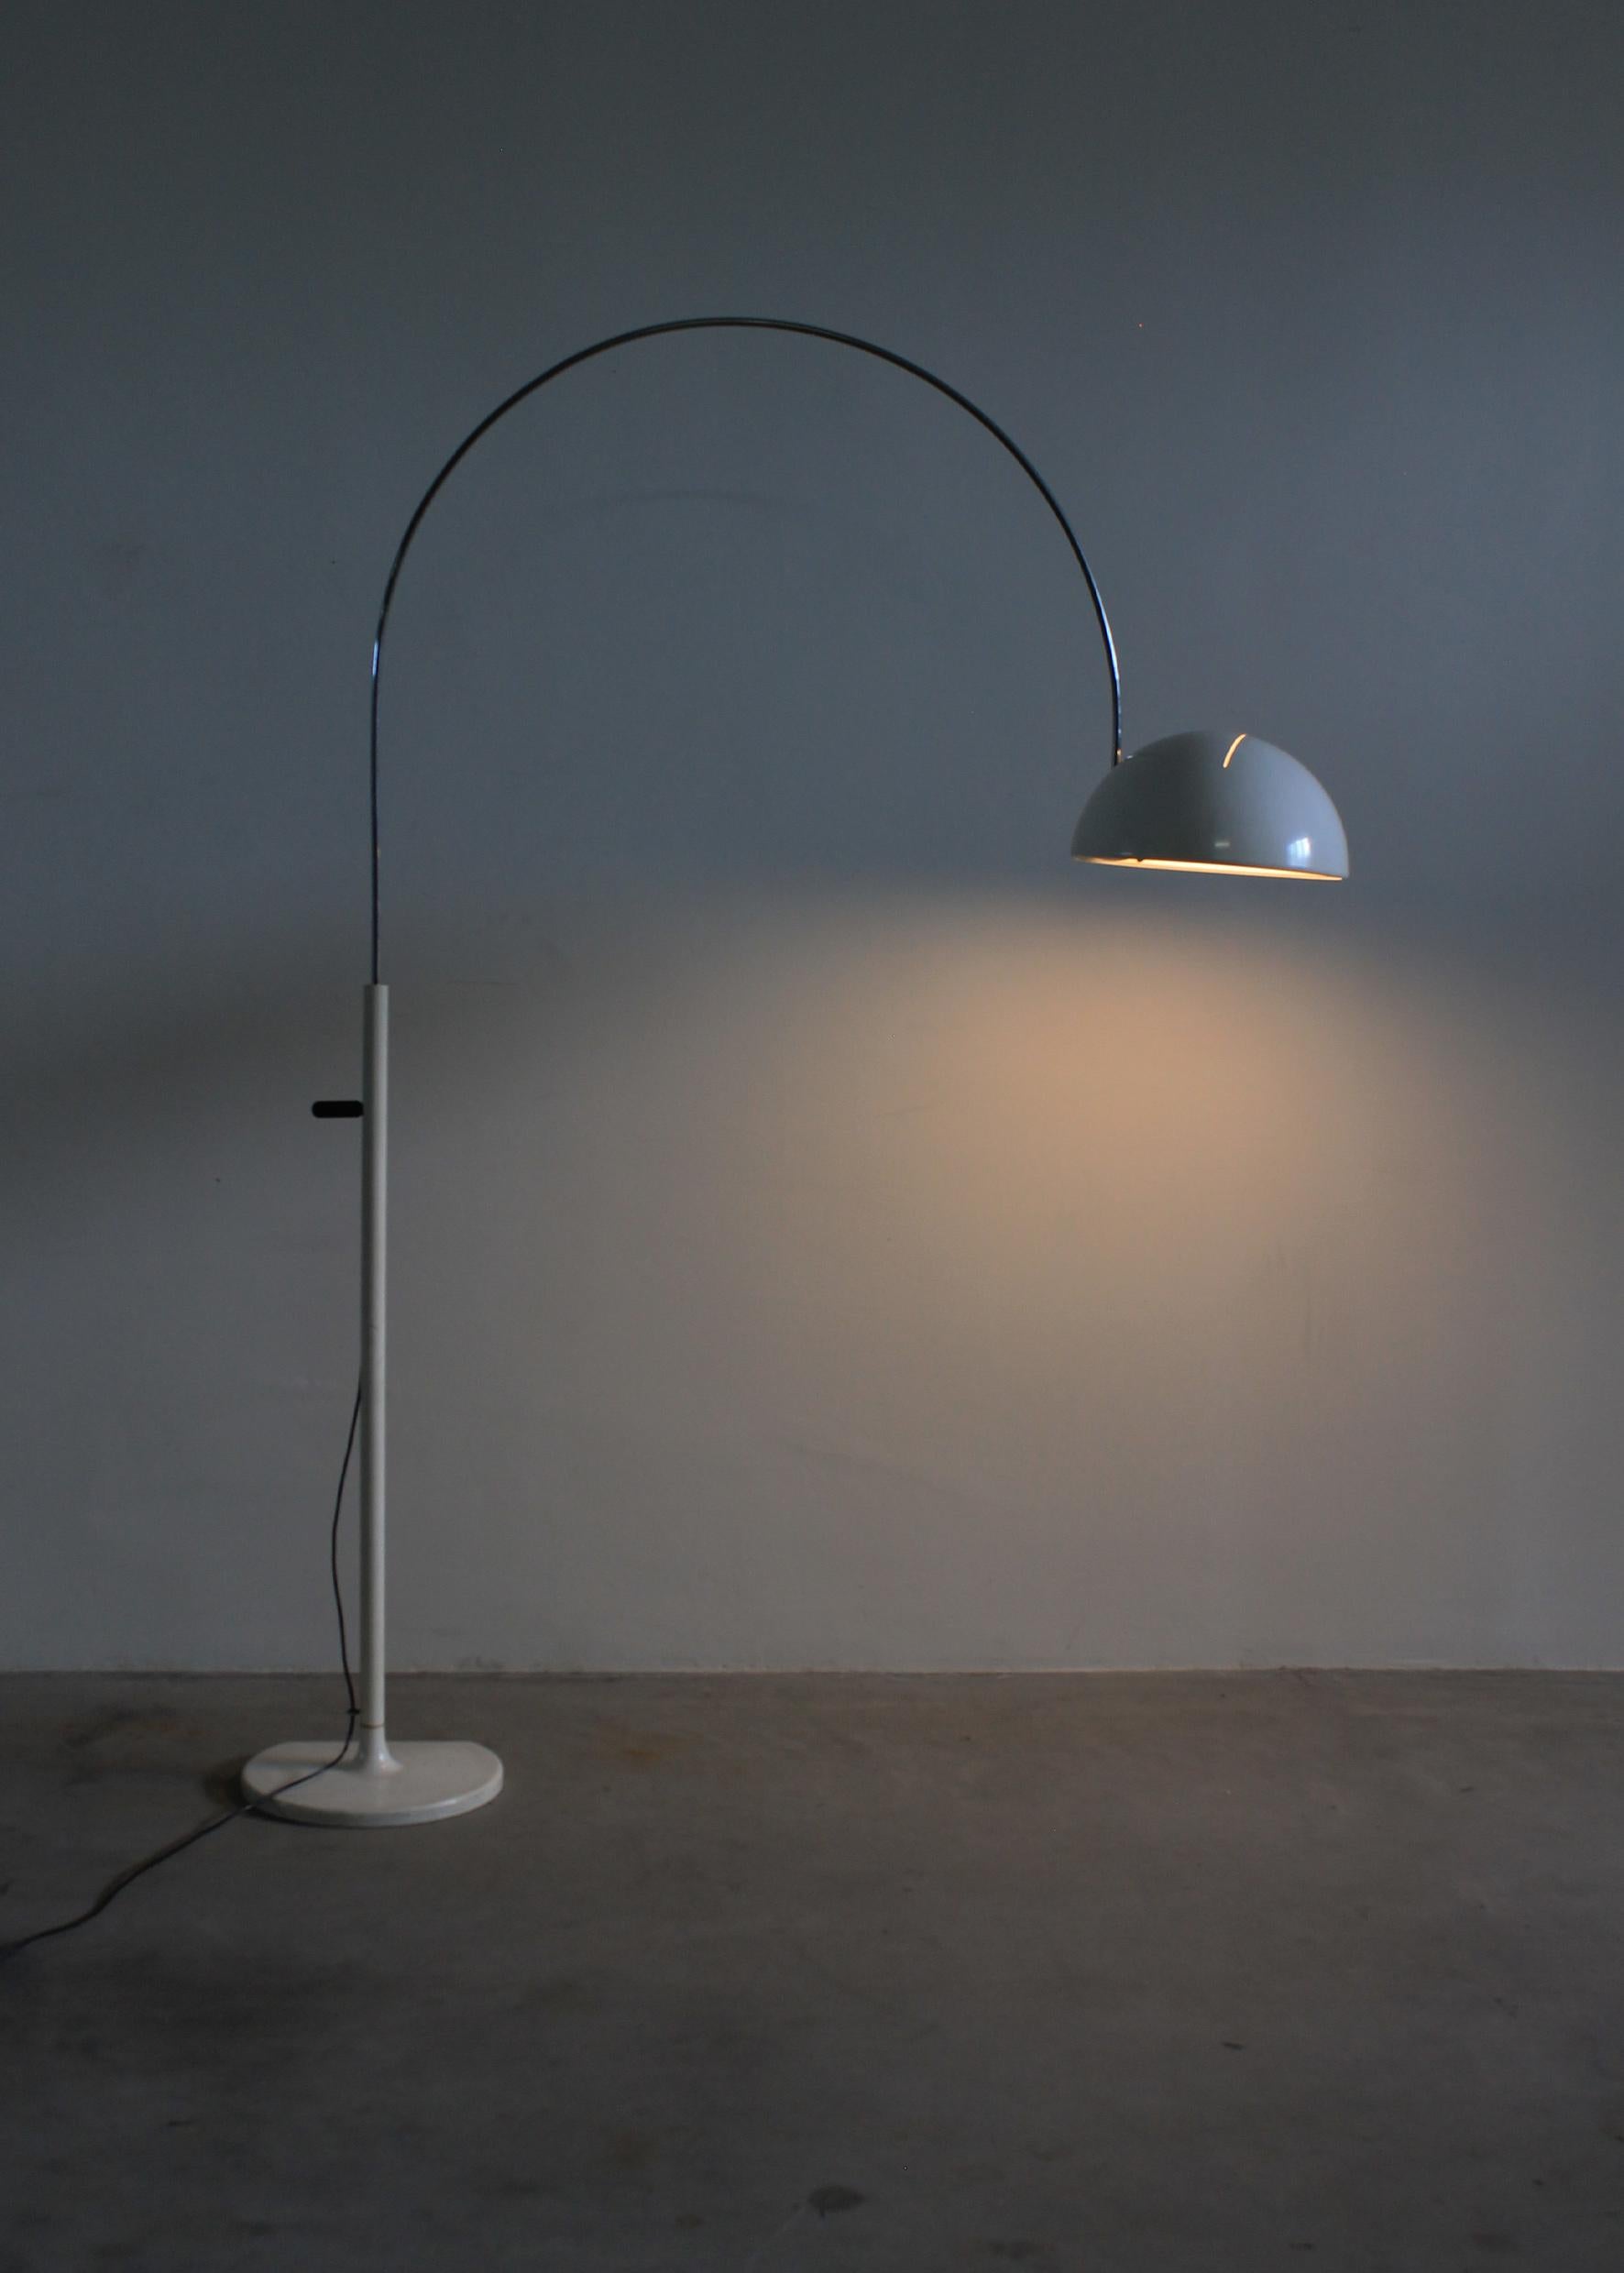 Mid-Century Modern Joe Colombo Coupè Floor Lamp in White Lacquered Metal by Oluce 1967 Italy